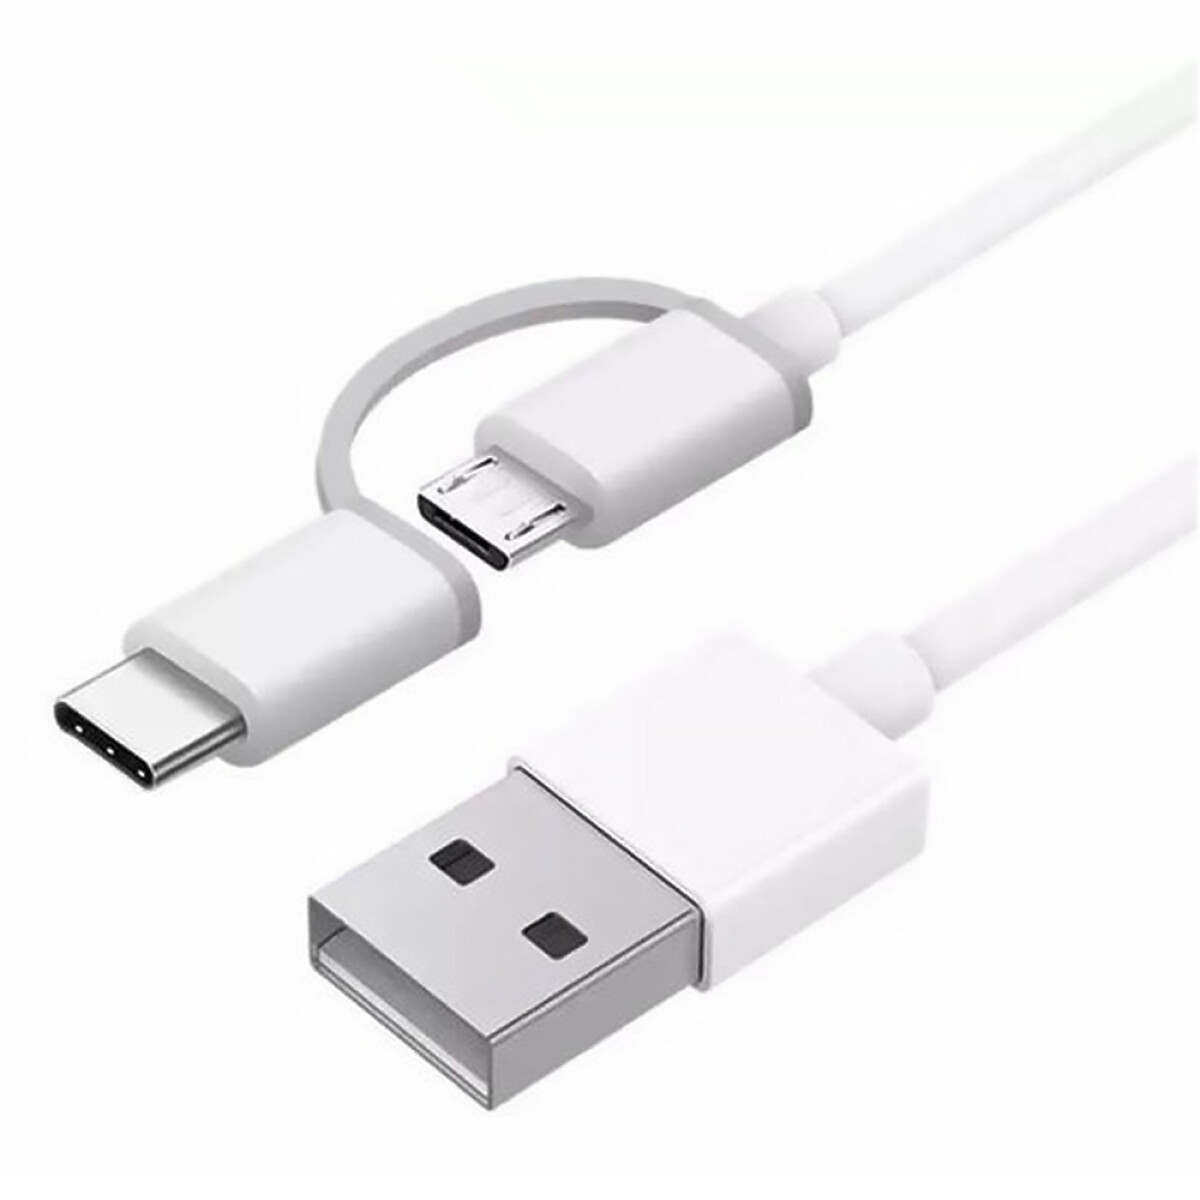 CABLE 2-IN-1 MICRO USB TO USB C 1M Blanca